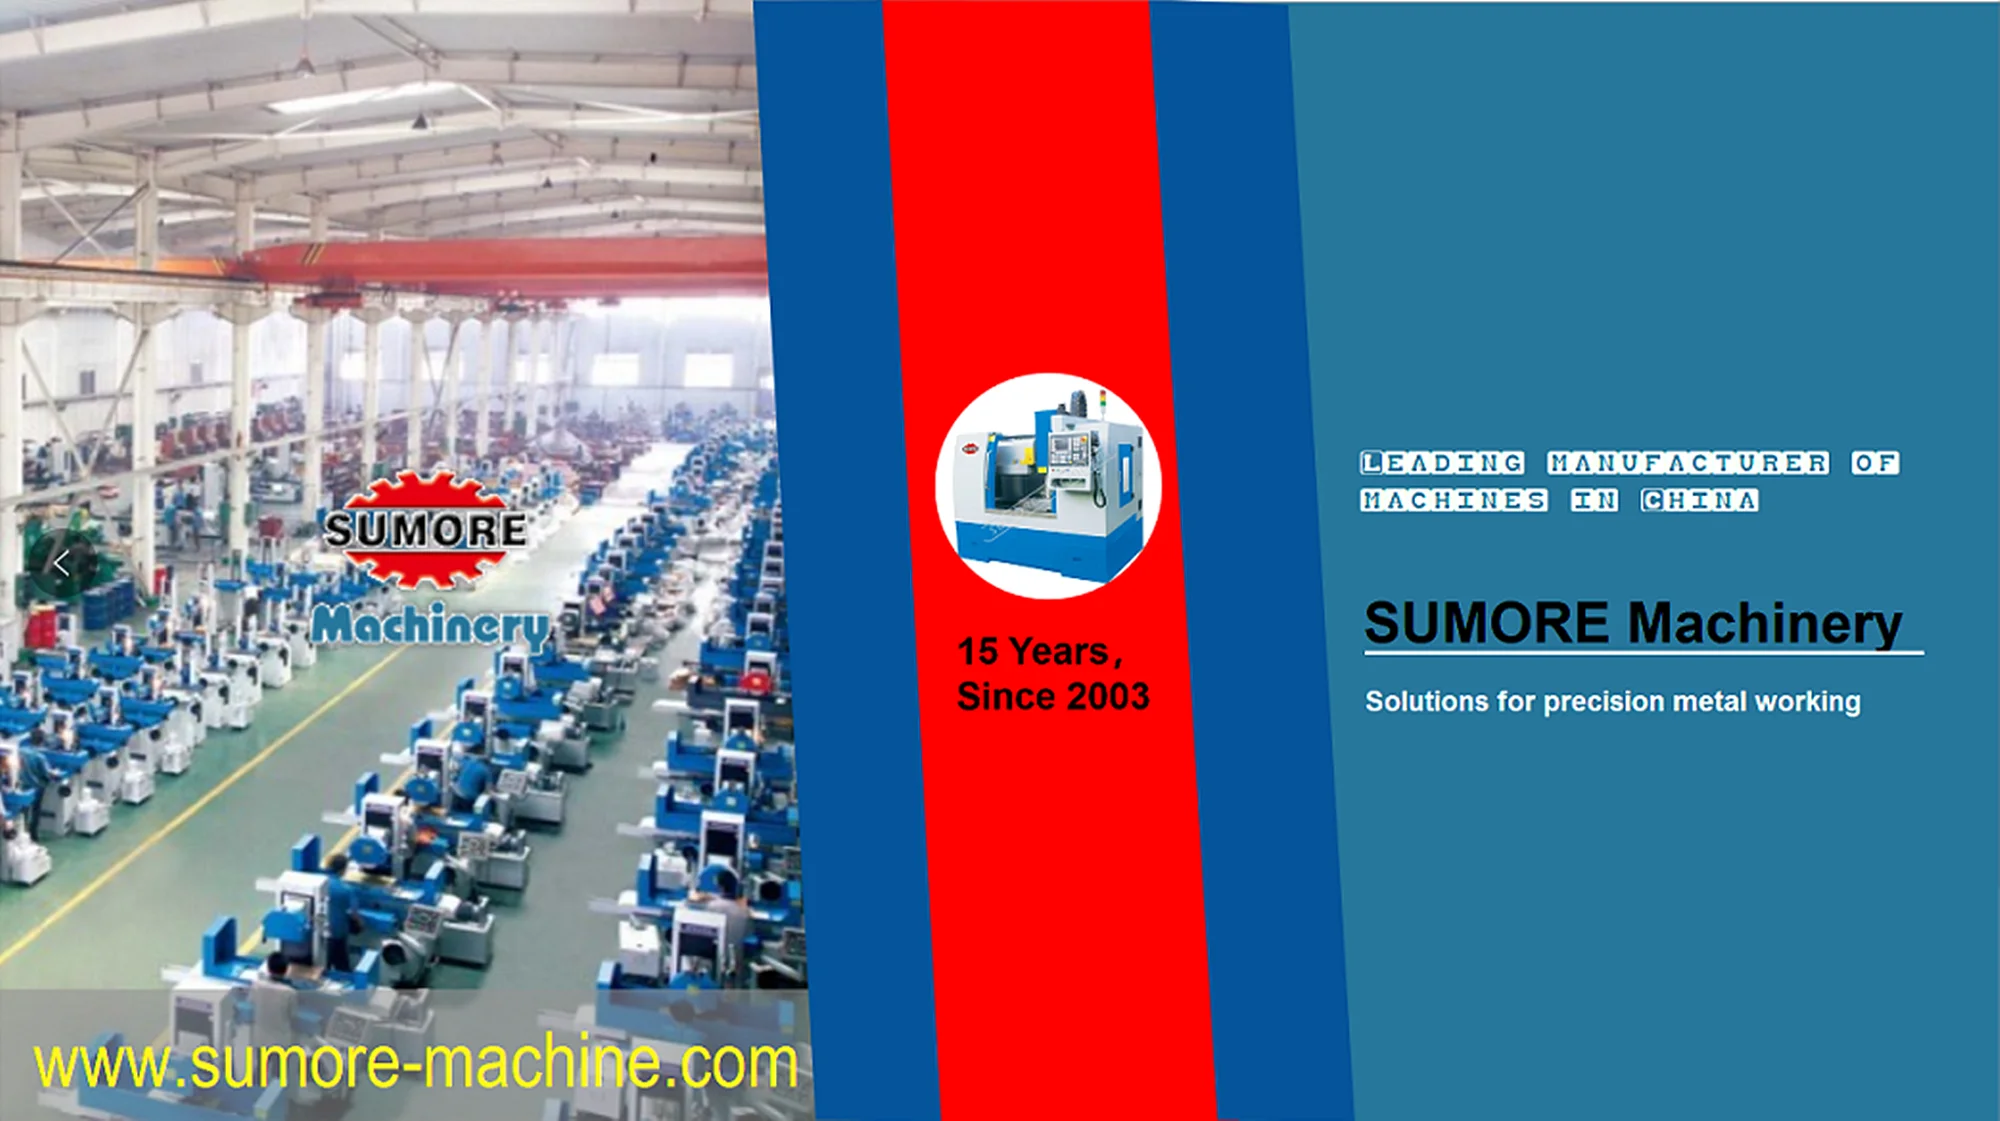 Hot Sale!!!SUMORE SP2105 foredom tm-2 bench lathe machine